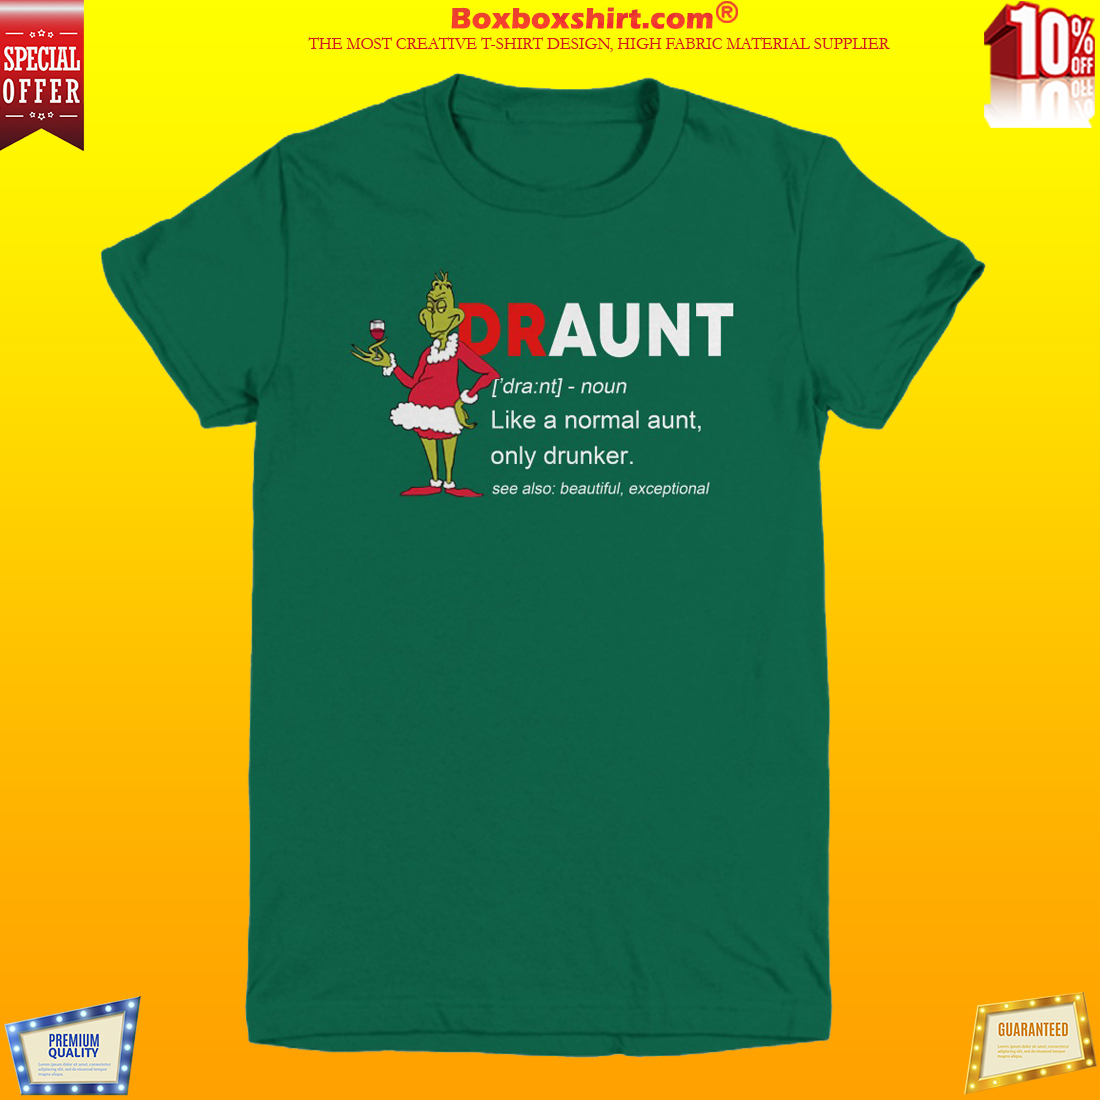 Draunt meaning like normal aunt only drunker shirt